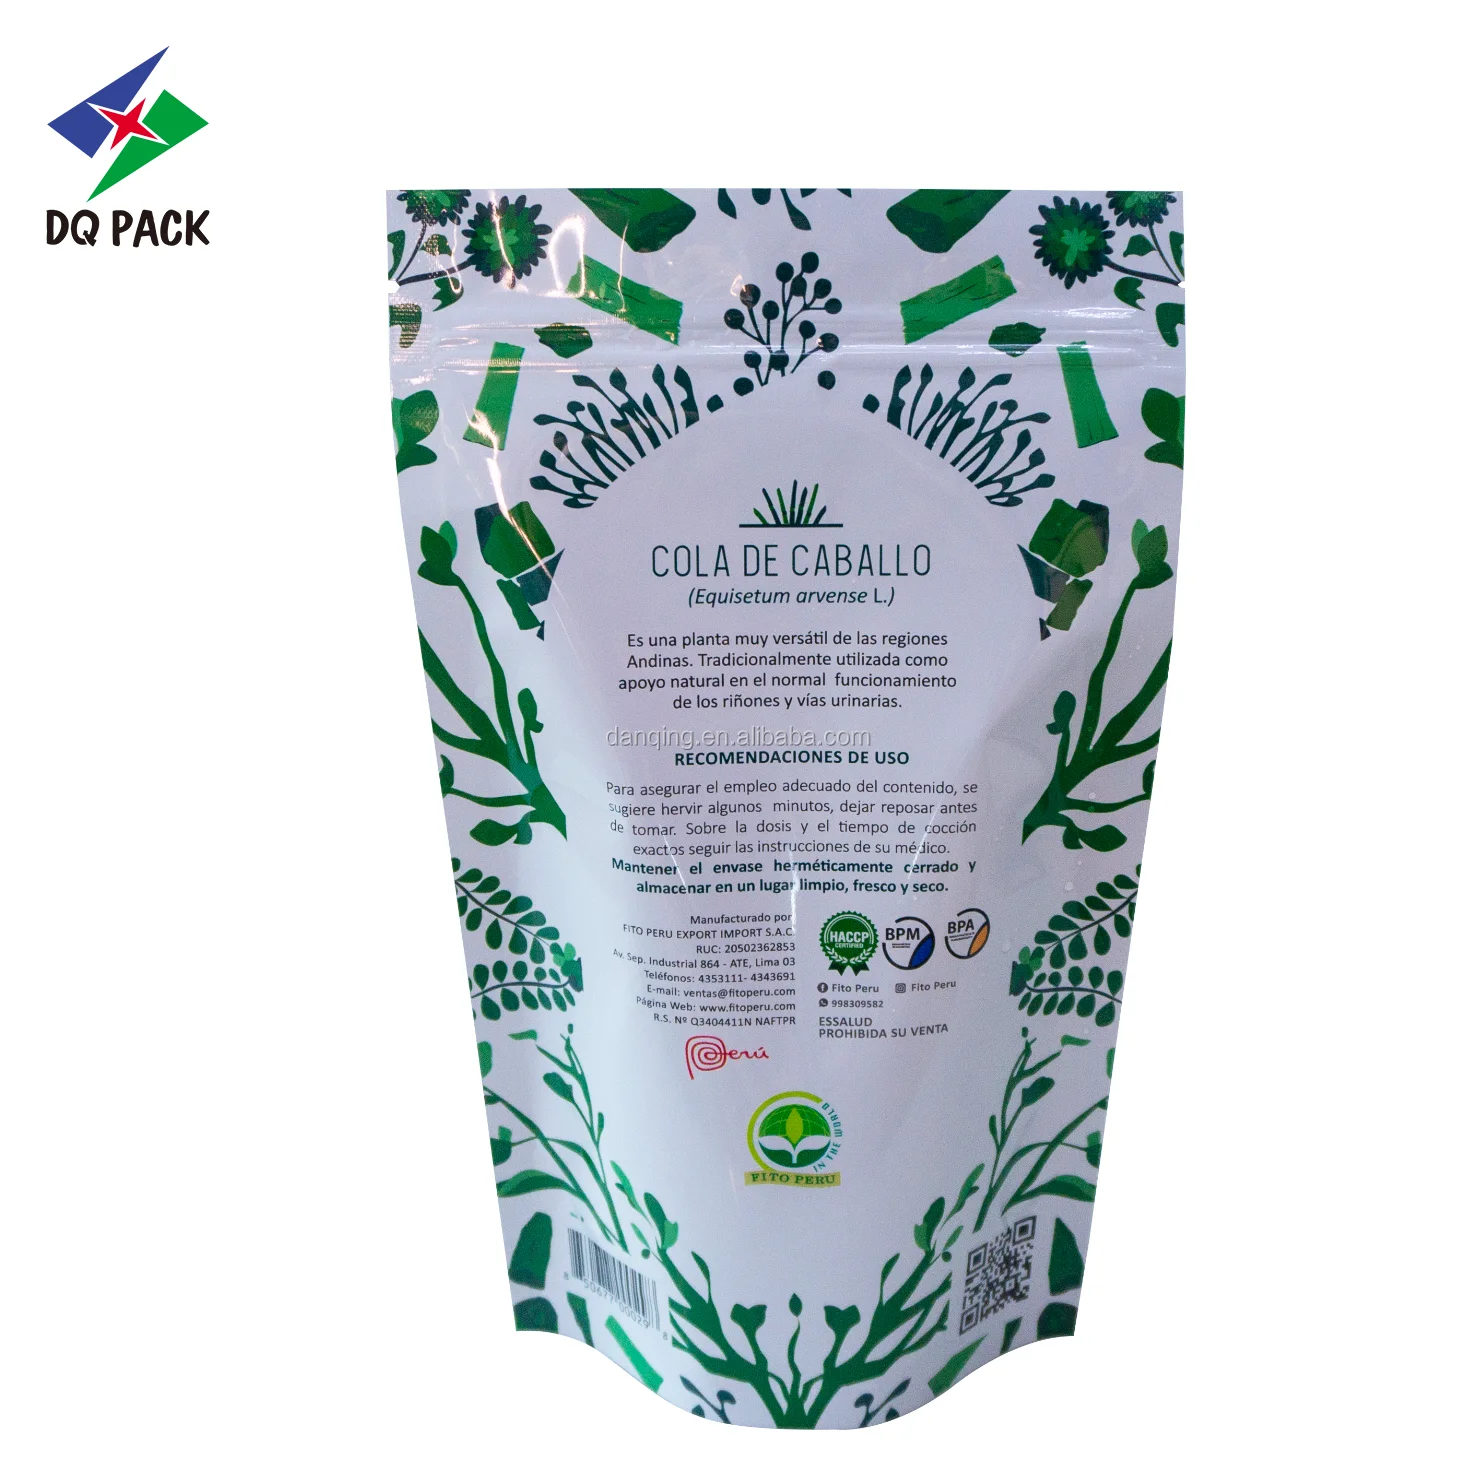 DQ PACK Herbal Grass Stand Up Pouch with Zipper Moisture Proof Packaging Bag